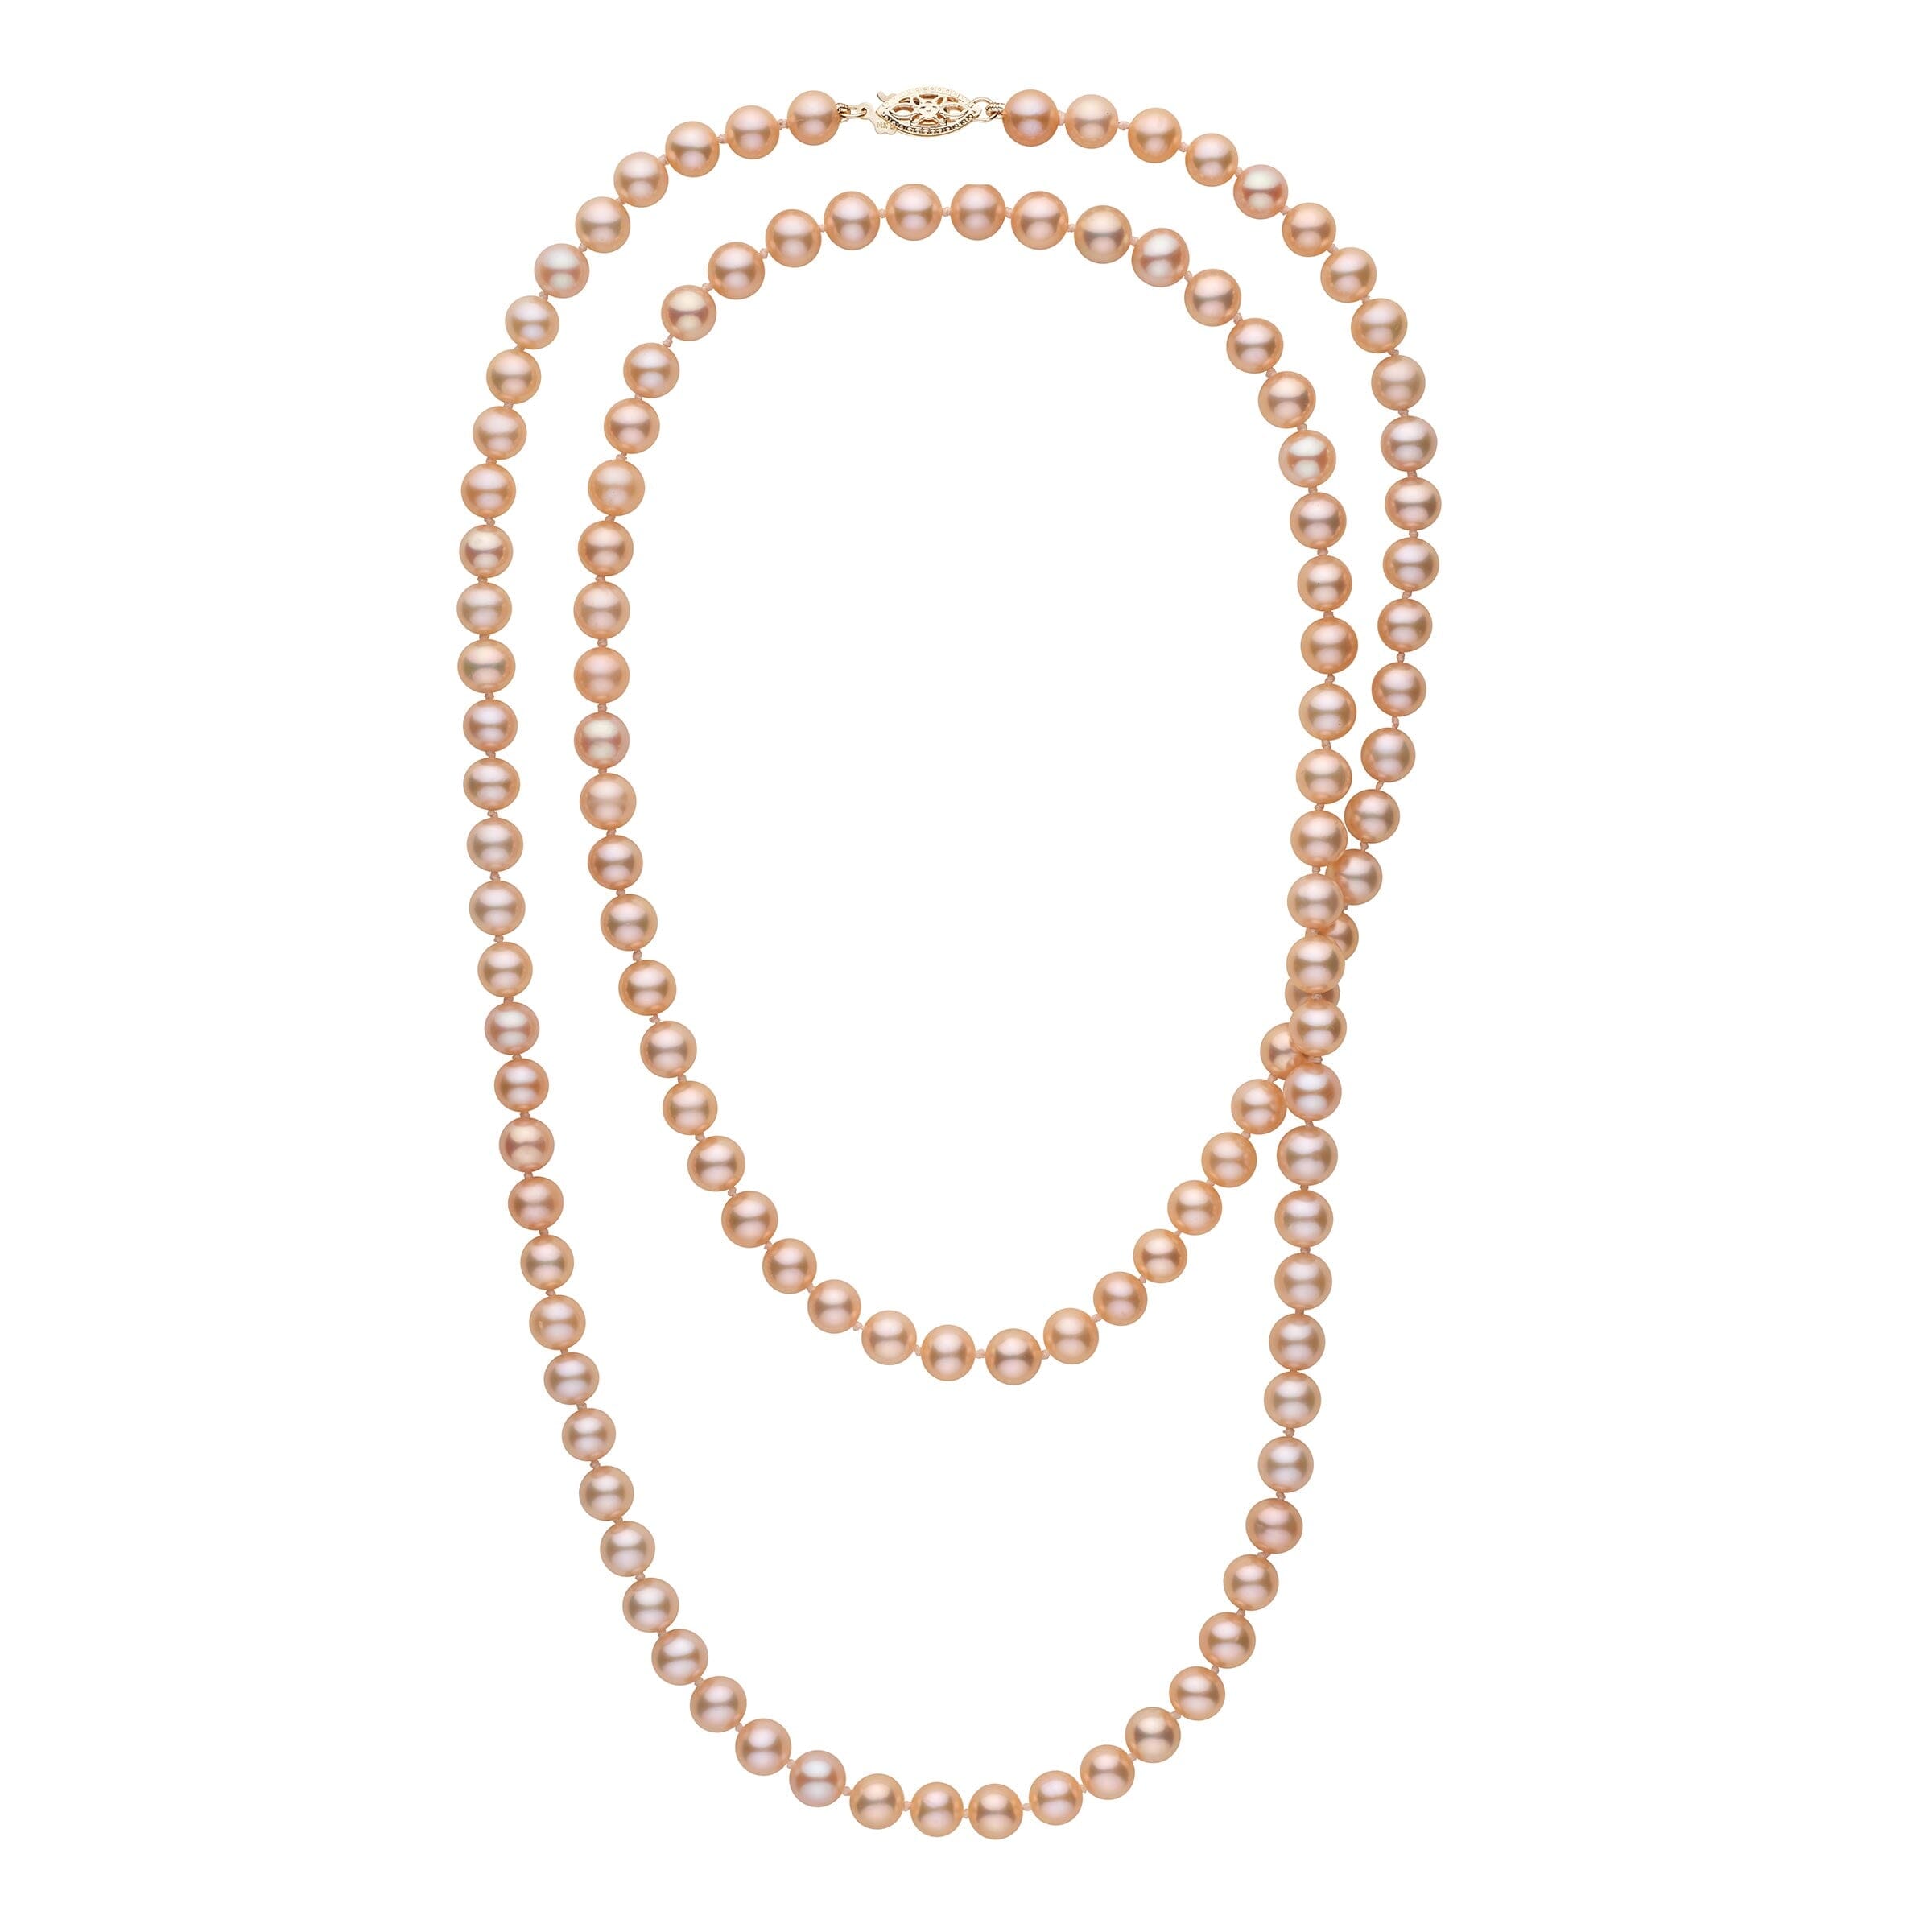 35-inch 6.5-7.0 mm AAA Pink to Peach Freshwater Pearl Necklace